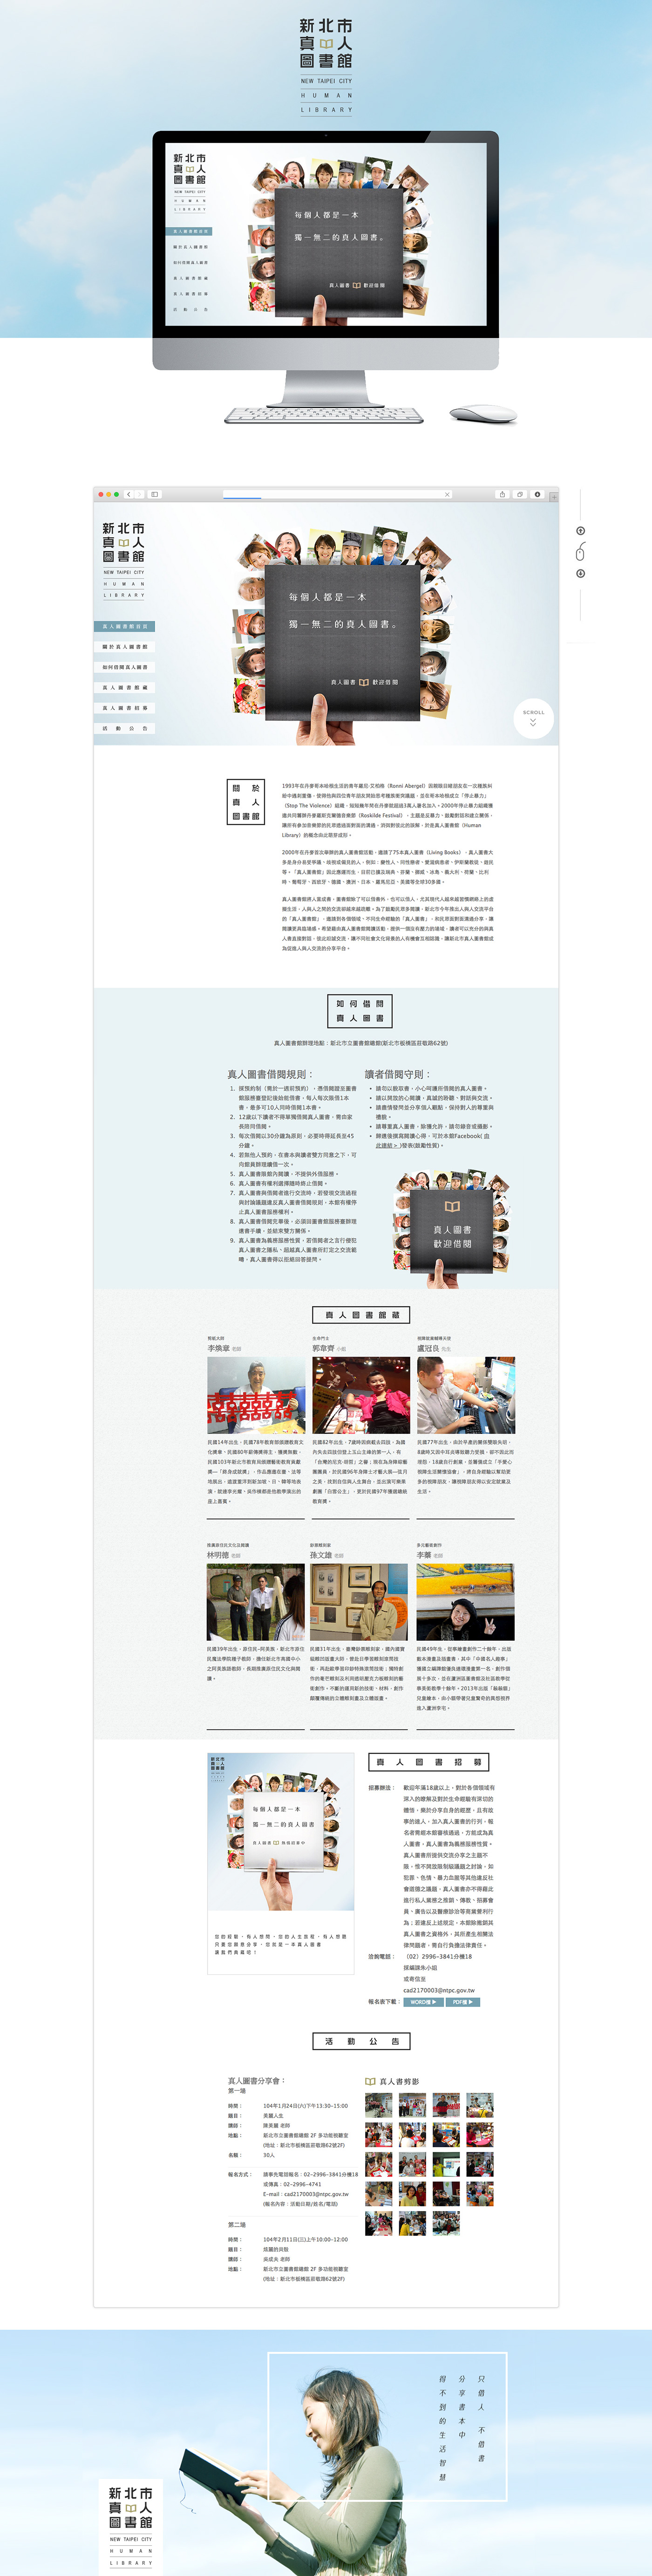 library 真人圖書 humanlibrary Webdesign 新北市政府 新北市立圖書館